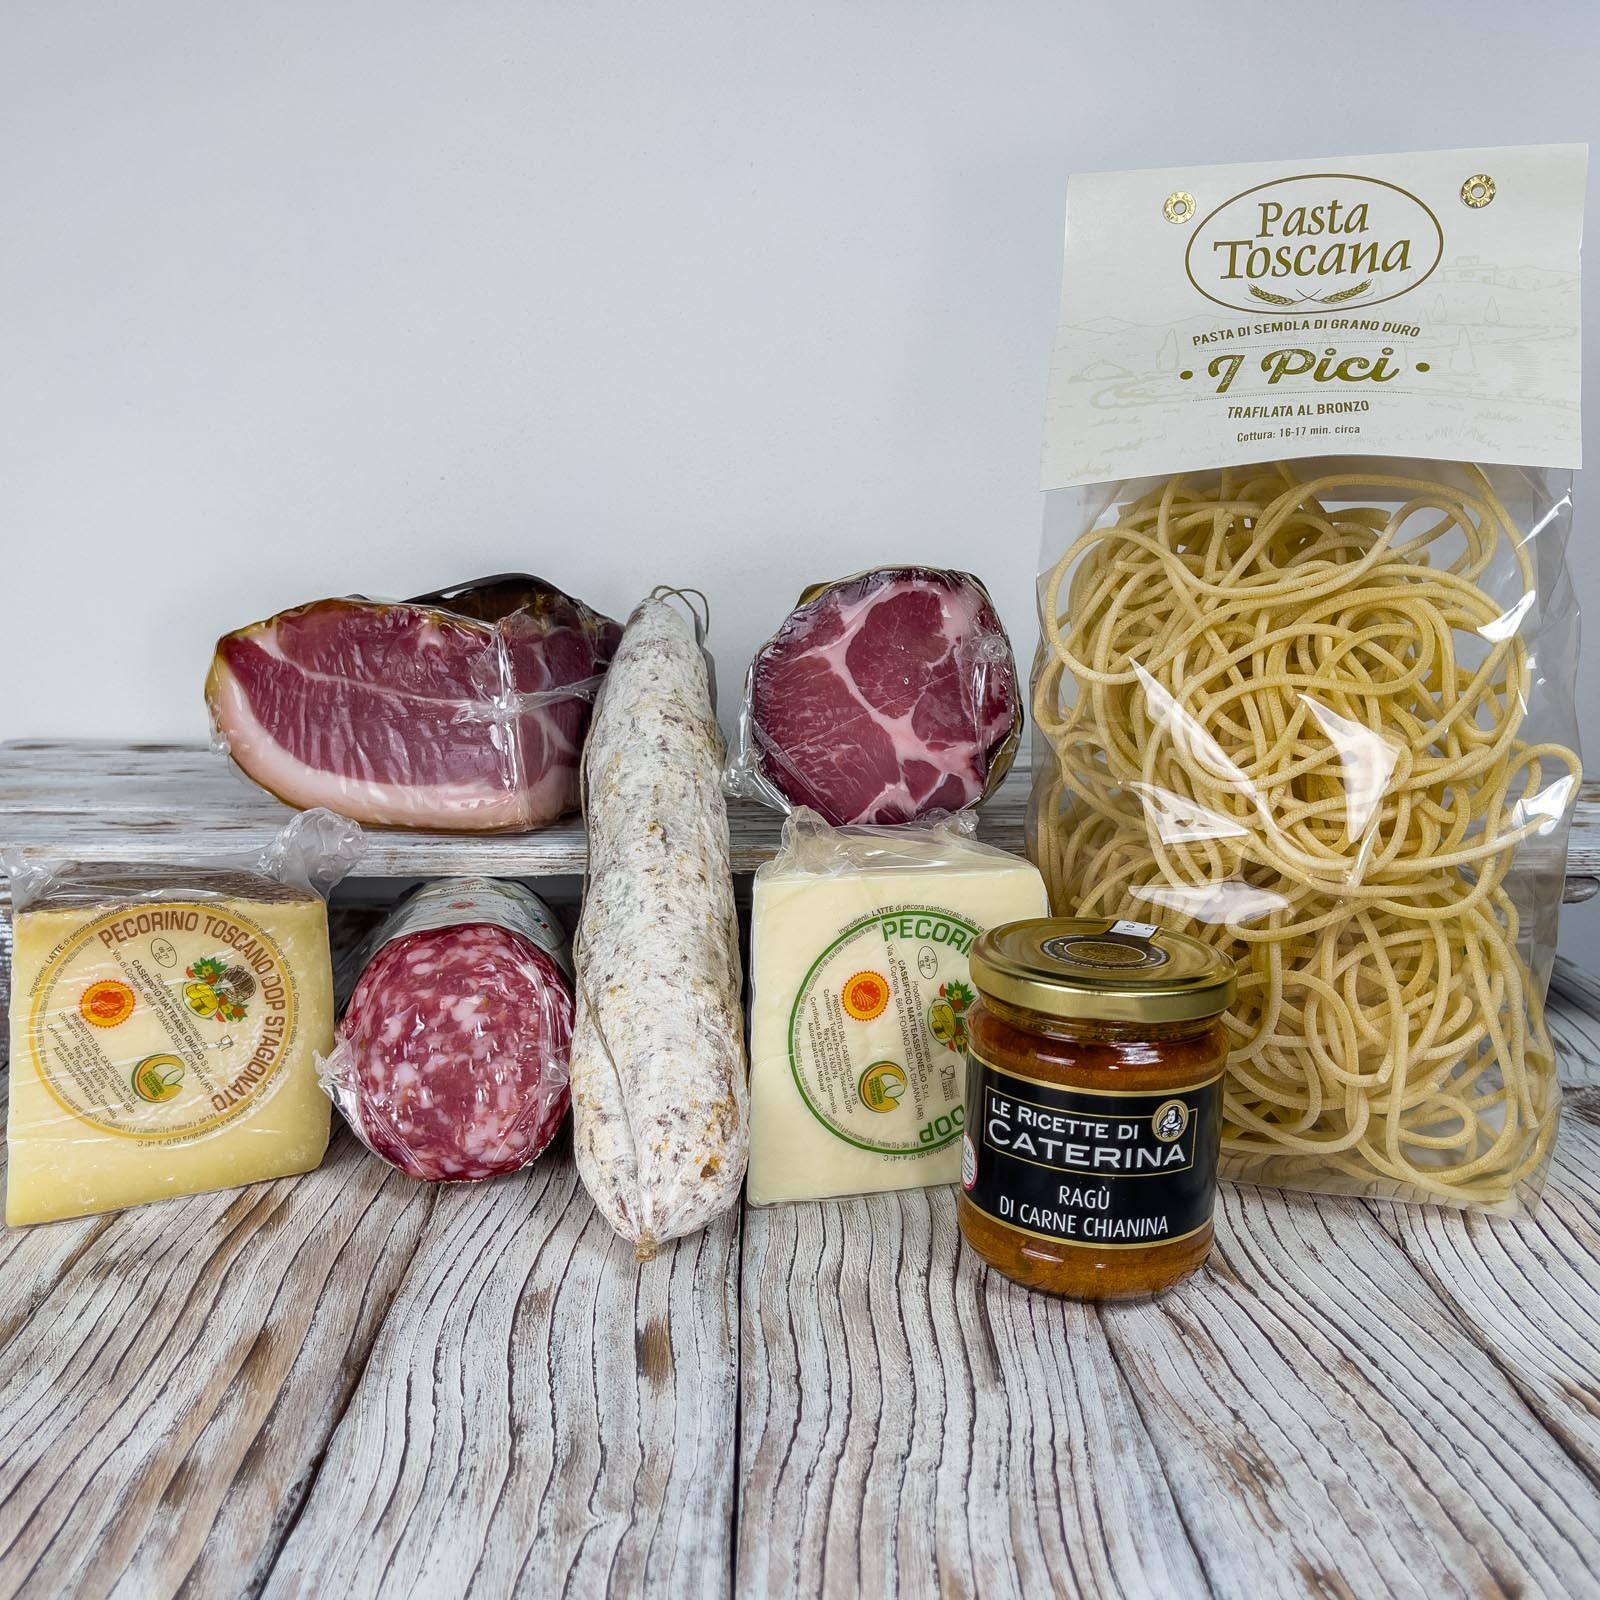 The Tasting Box - “I Sapori Della Valdichiana” is made up of a selection of products for a total of about 4.2 kg. Perfect for preparing a huge platter of Tuscan cold cuts and cheeses as an appetizer and “Pici” with Chianina Meat Sauce a quality first course.